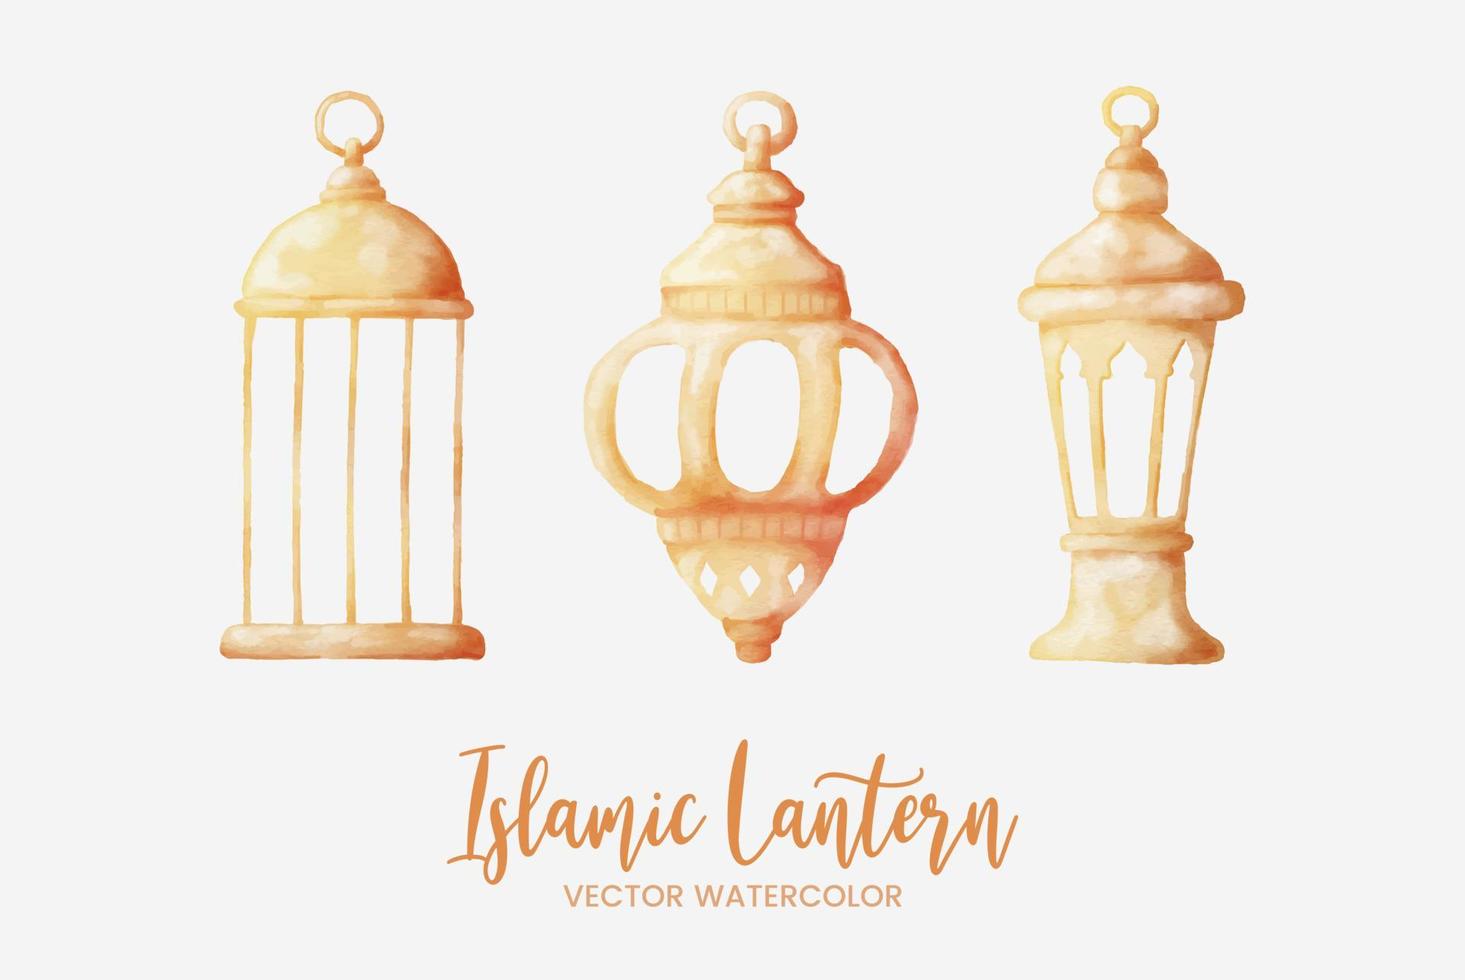 islamic lantern watercolor with 3 objects variation illustration with golden metal material vector